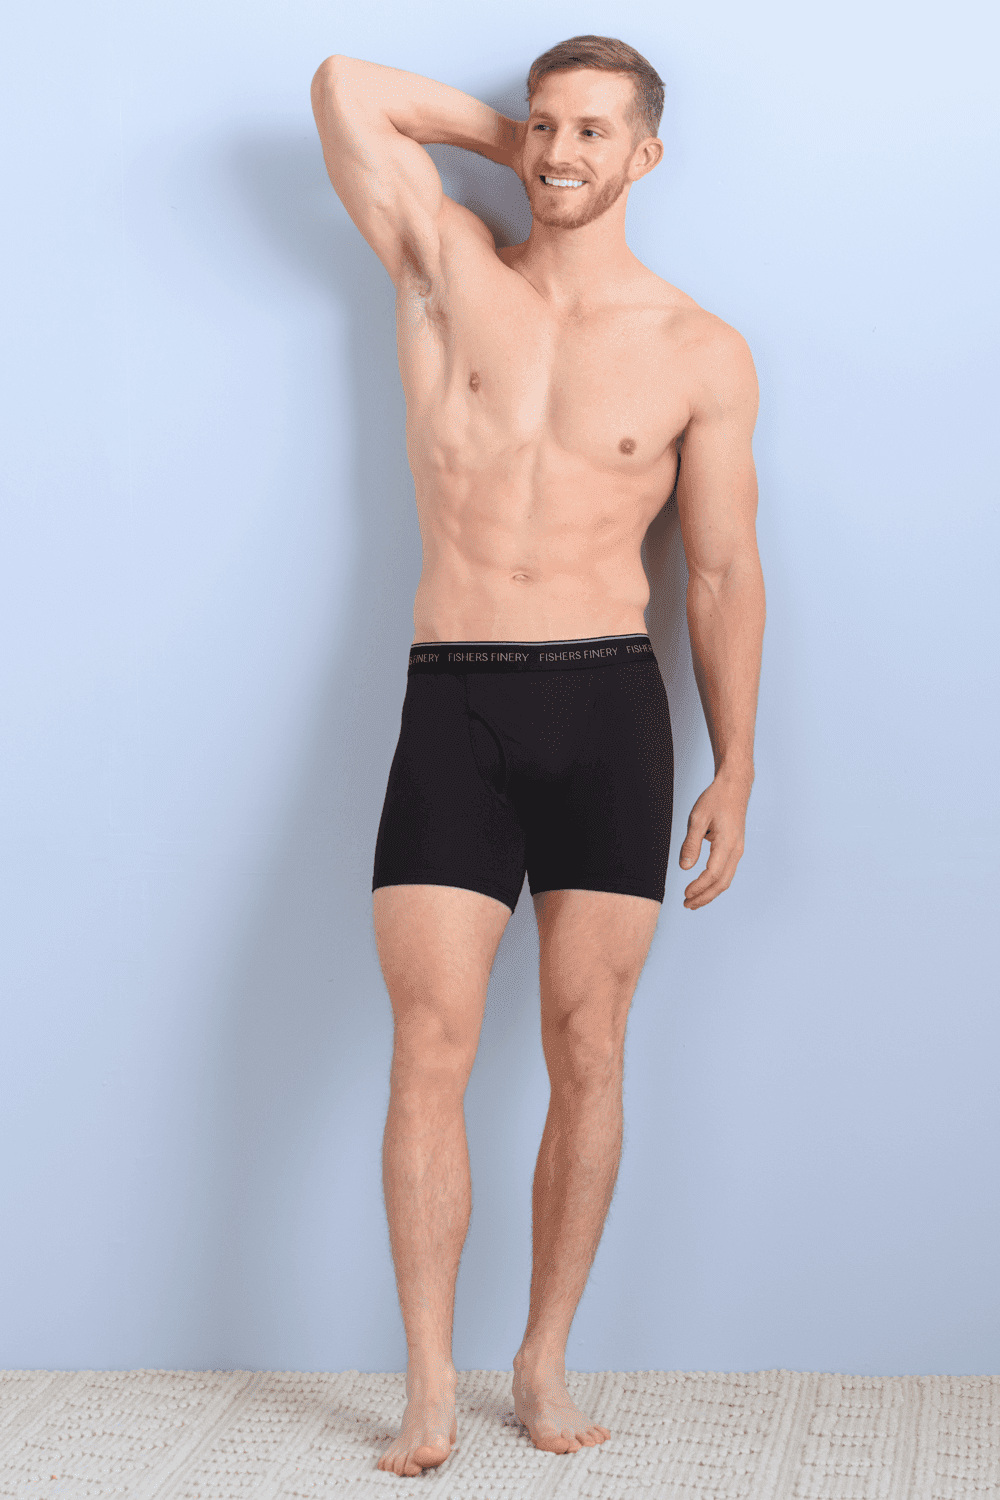 Best gifts for men: This 'buttery soft' underwear brand is a go-to